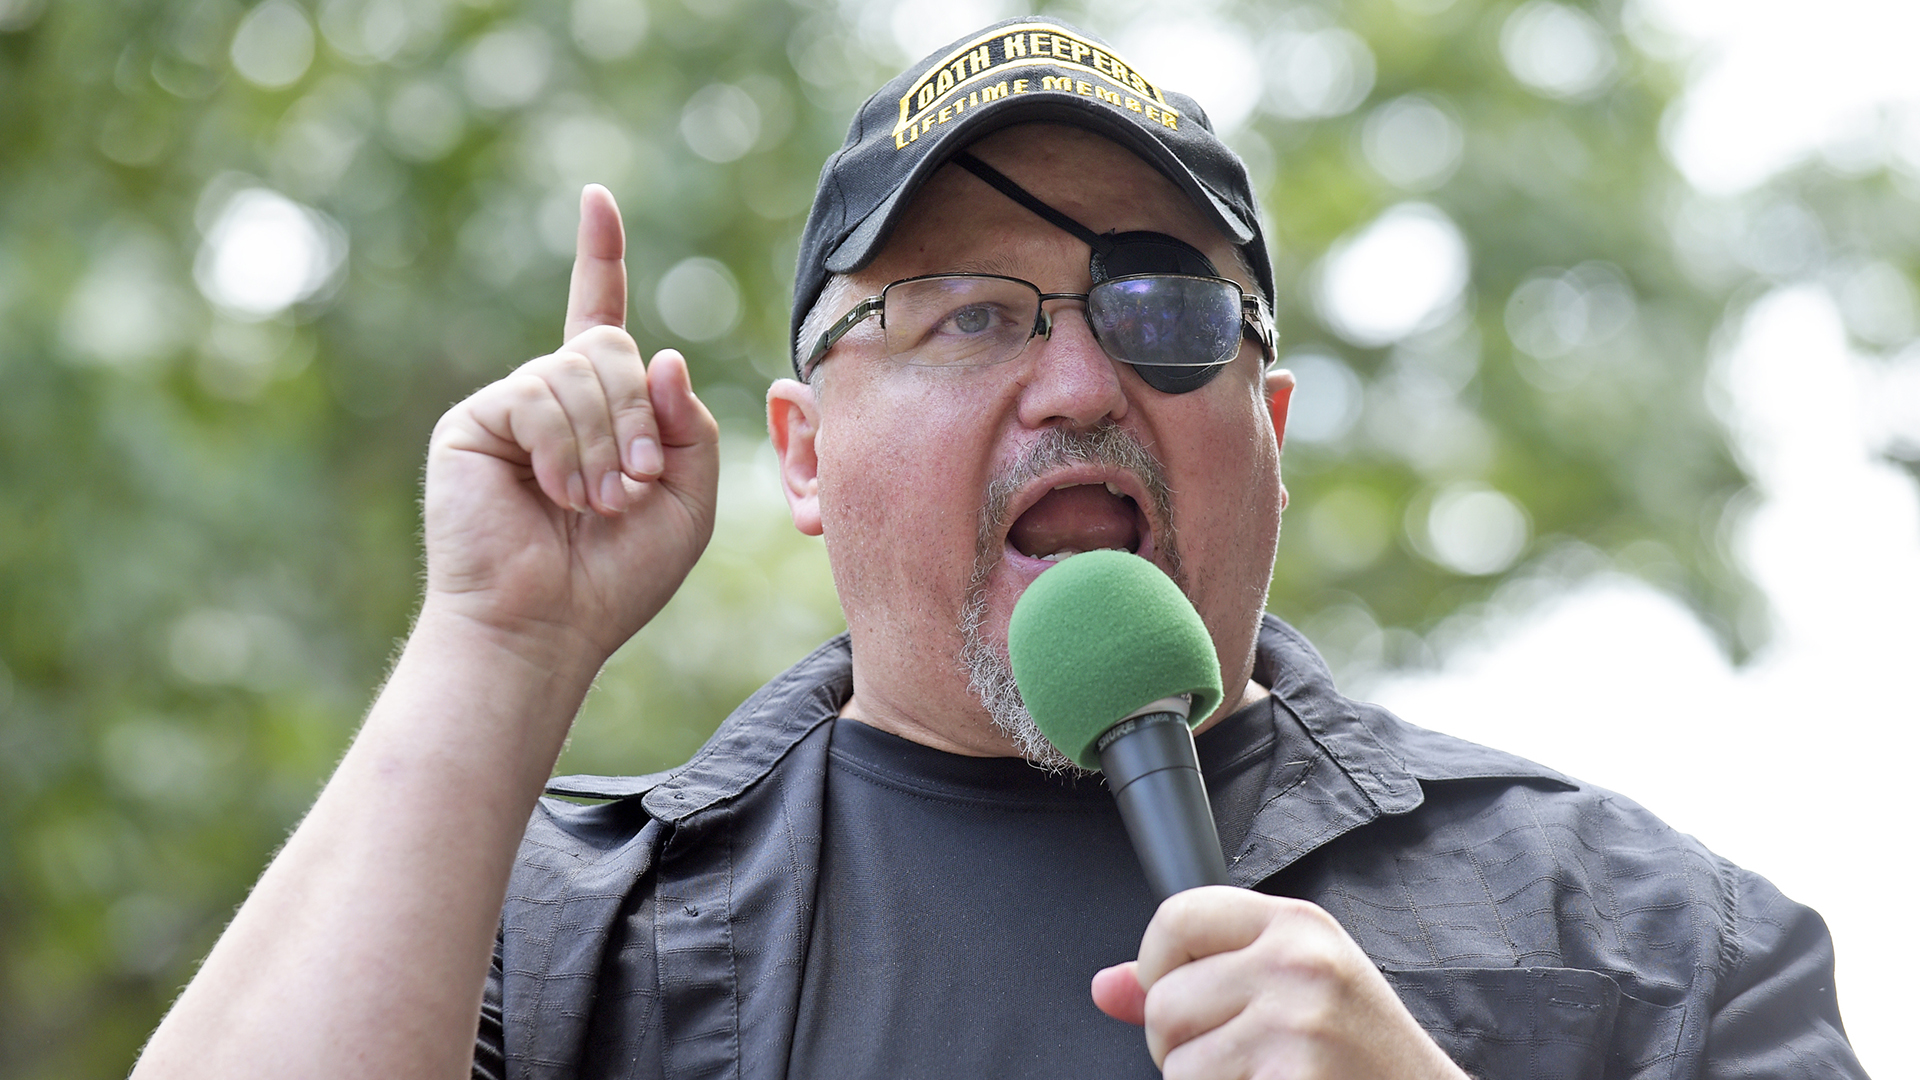 Oath Keepers leader arrested in Jan. 6 investigation thumbnail